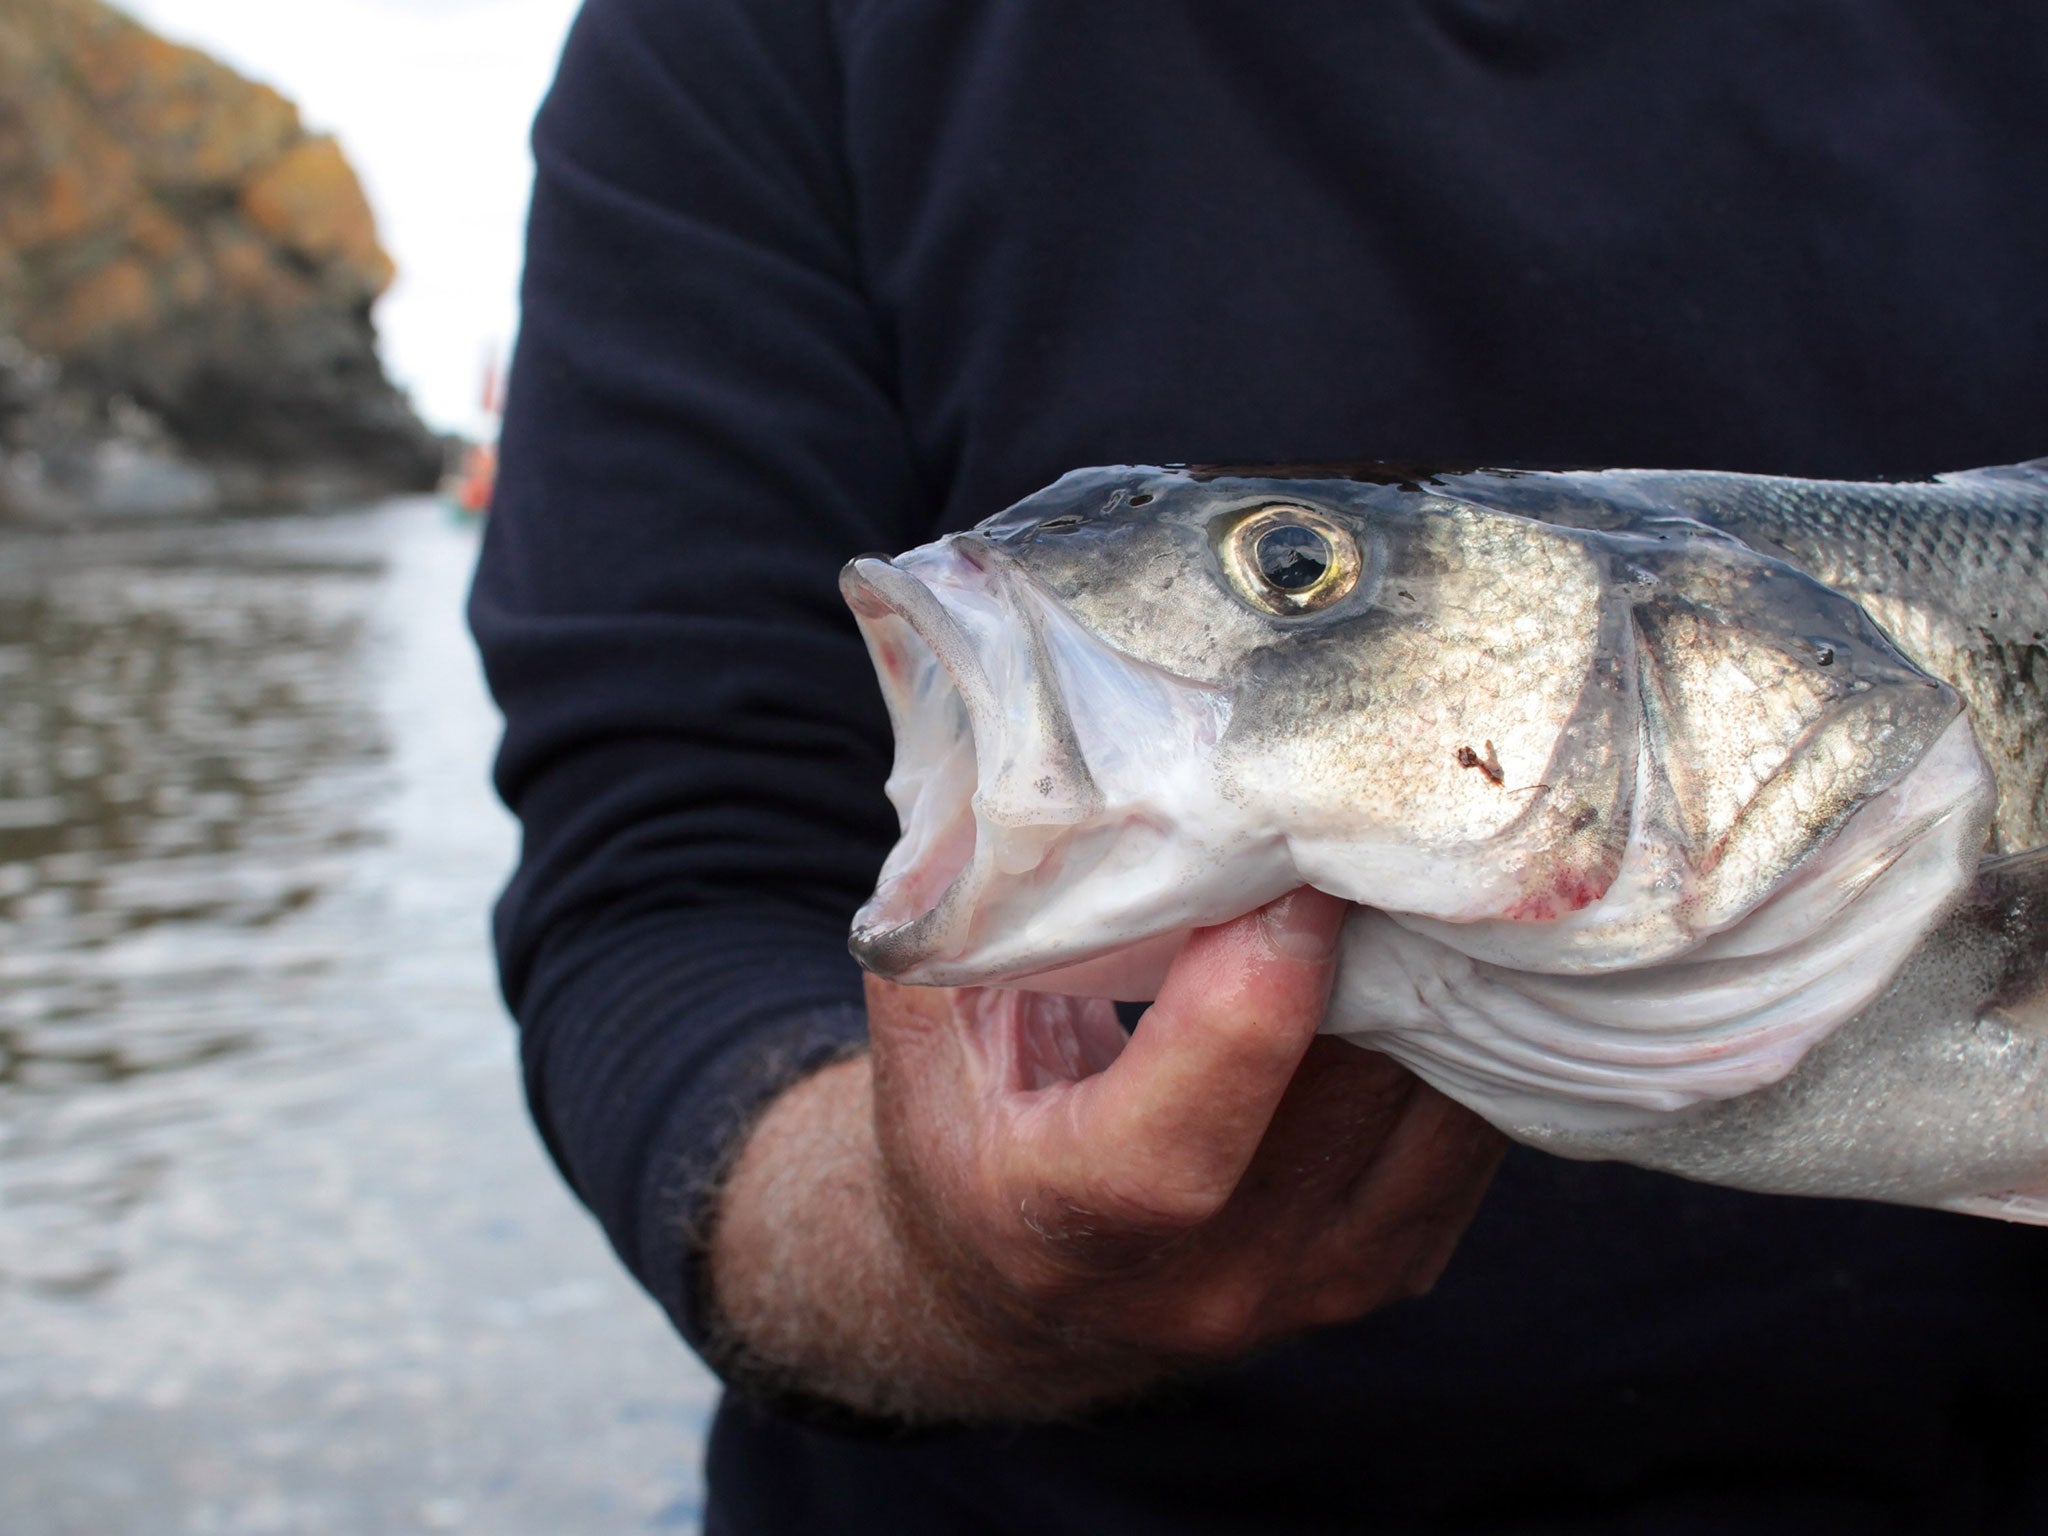 Recreational anglers are responsible for about a quarter of the wild sea bass catch